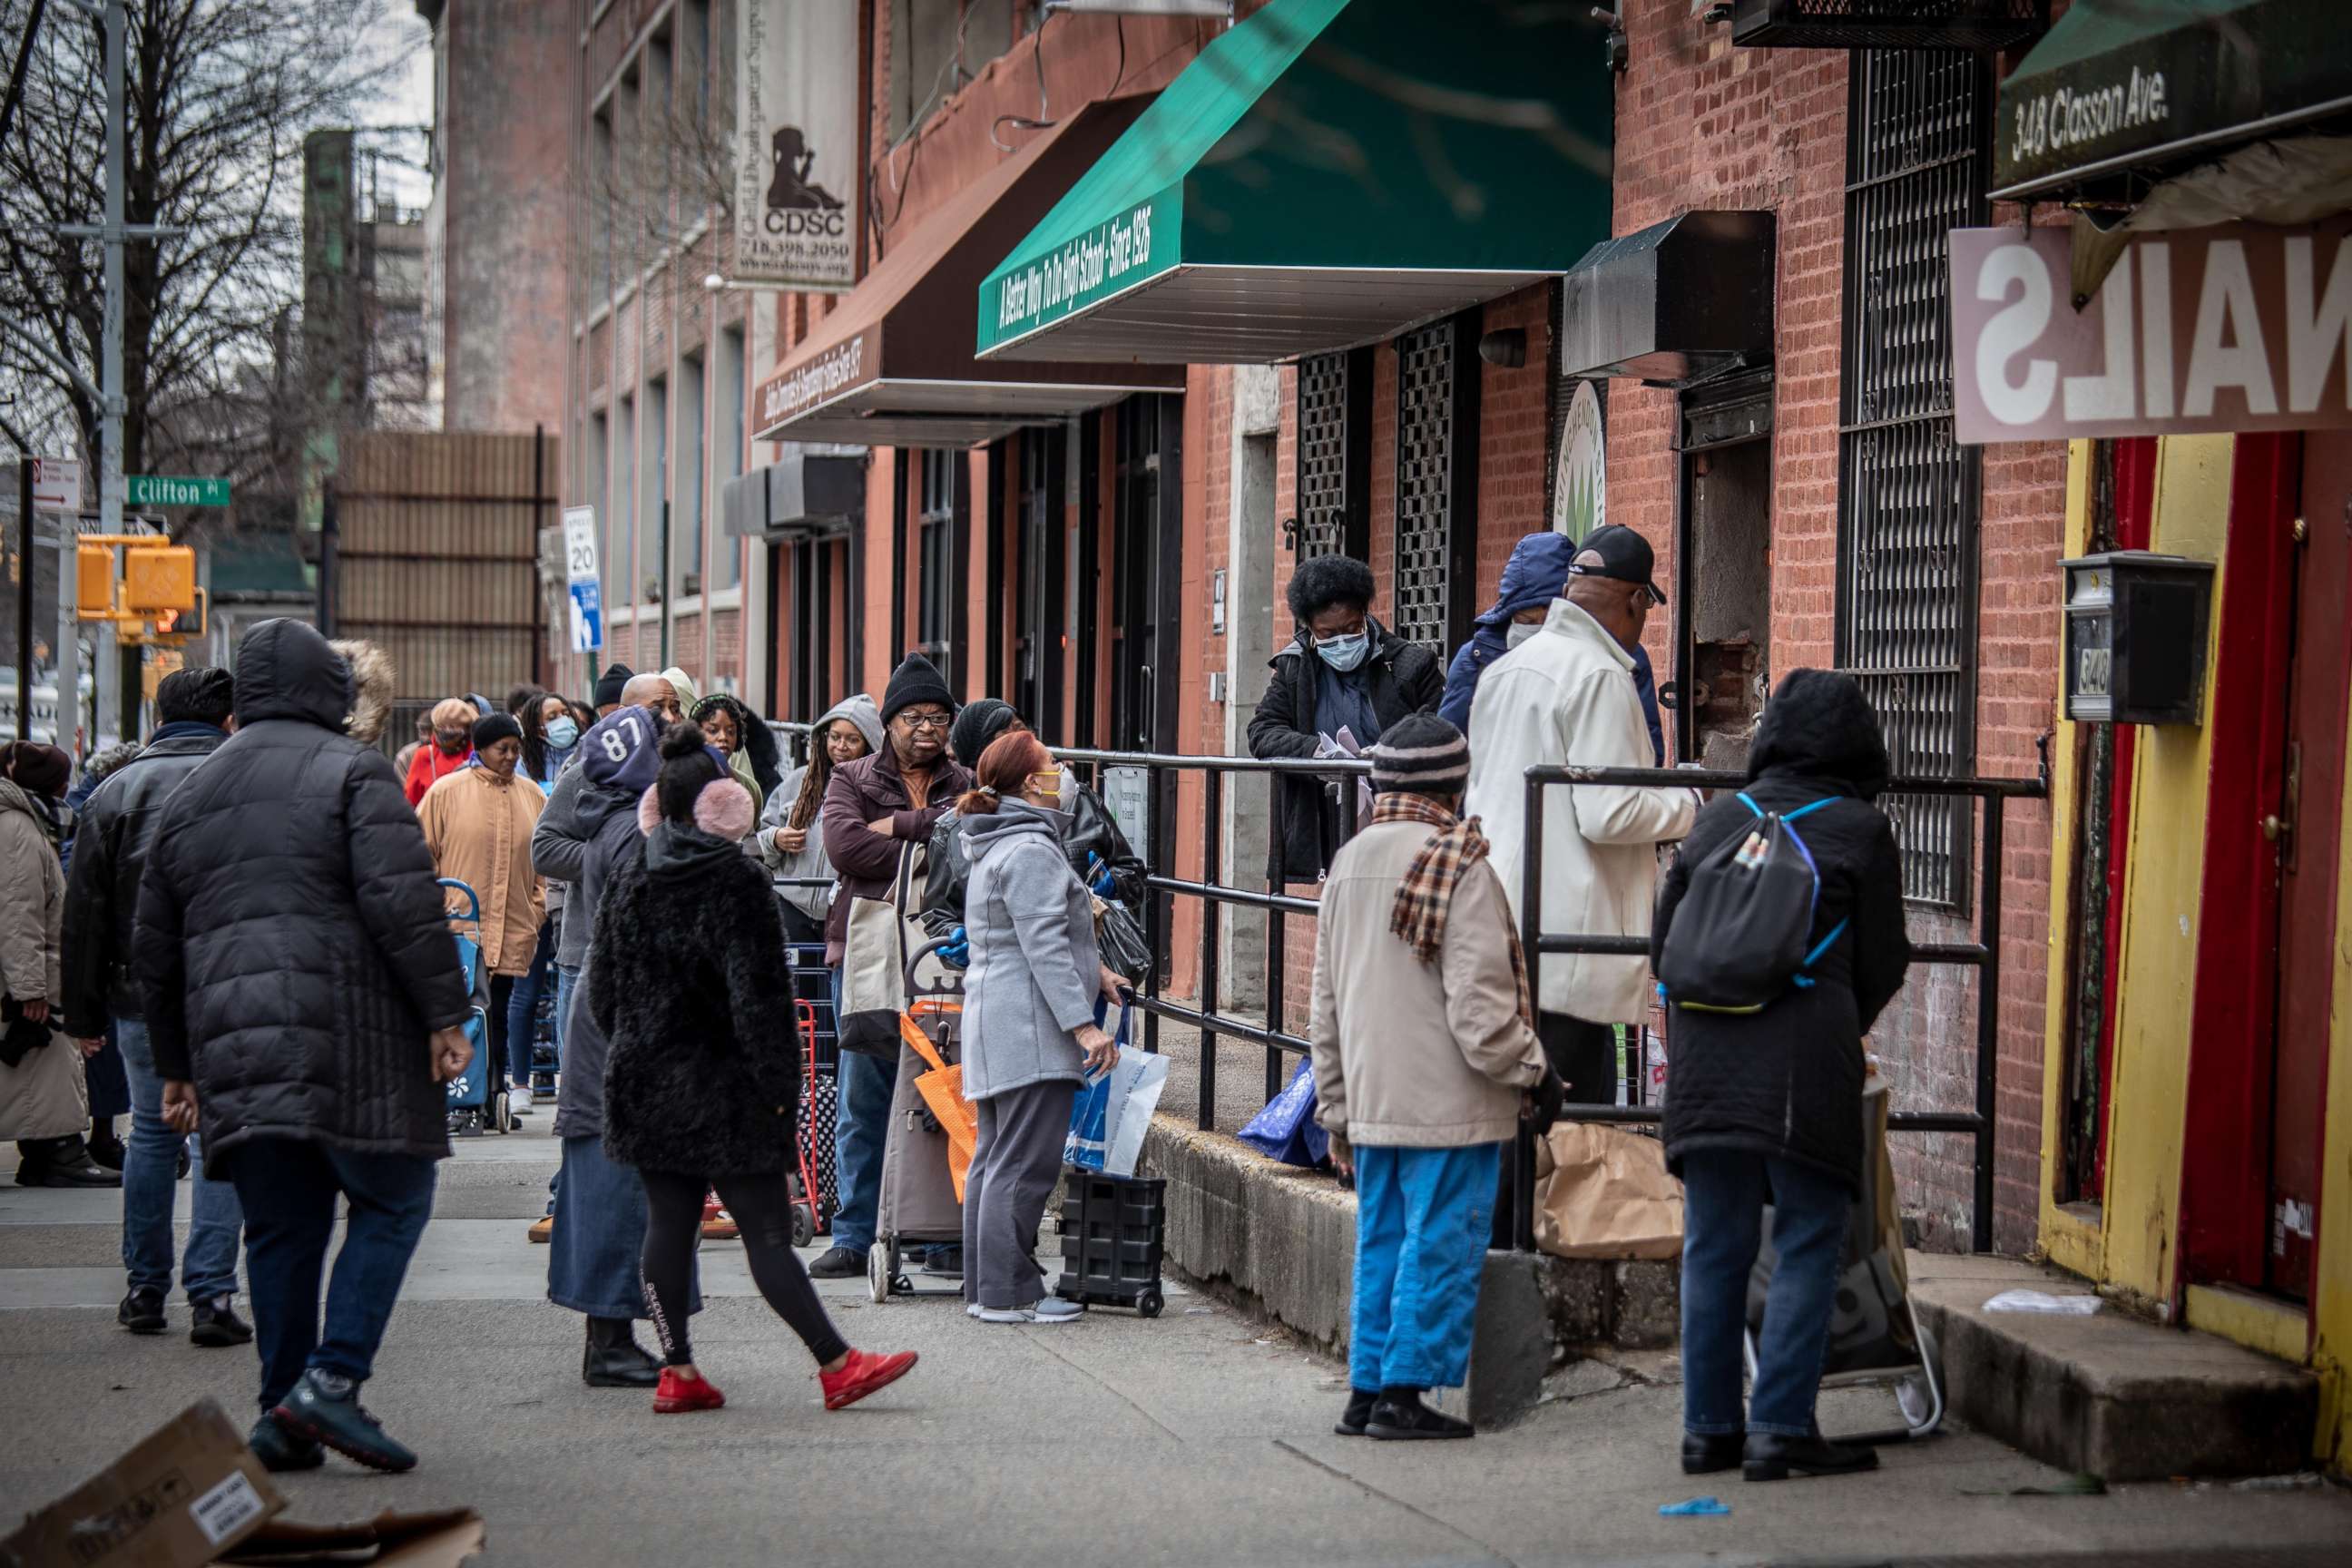 PHOTO: People stand in line outside a food pantry in the Bedford-Stuyvesant neighborhood of Brooklyn, New York, during the coronavirus pandemic, March 19, 2020.